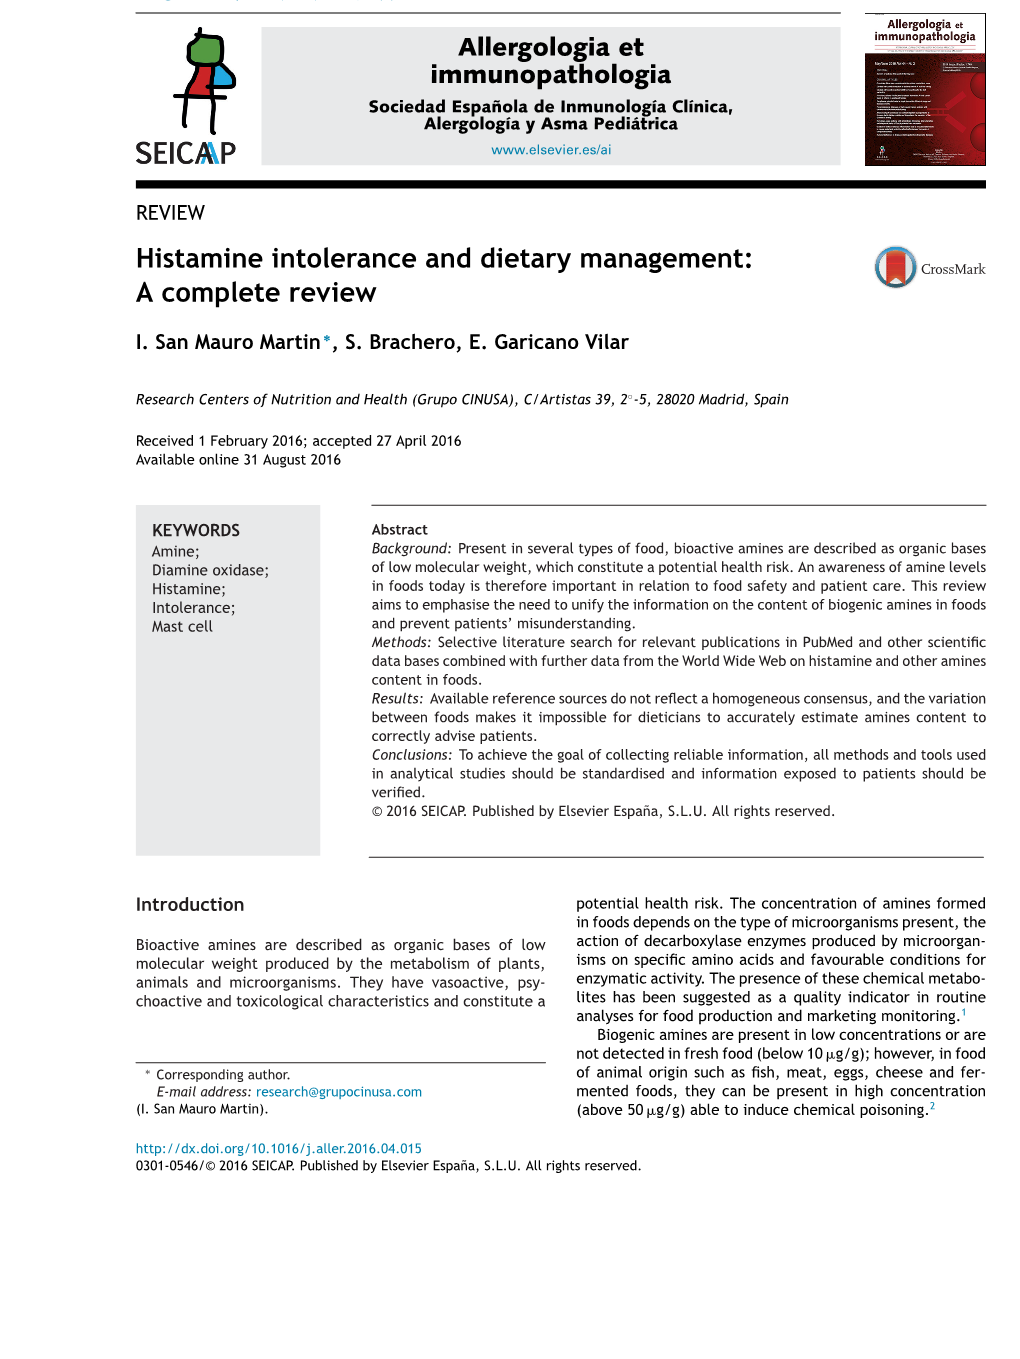 Histamine Intolerance and Dietary Management: a Complete Review